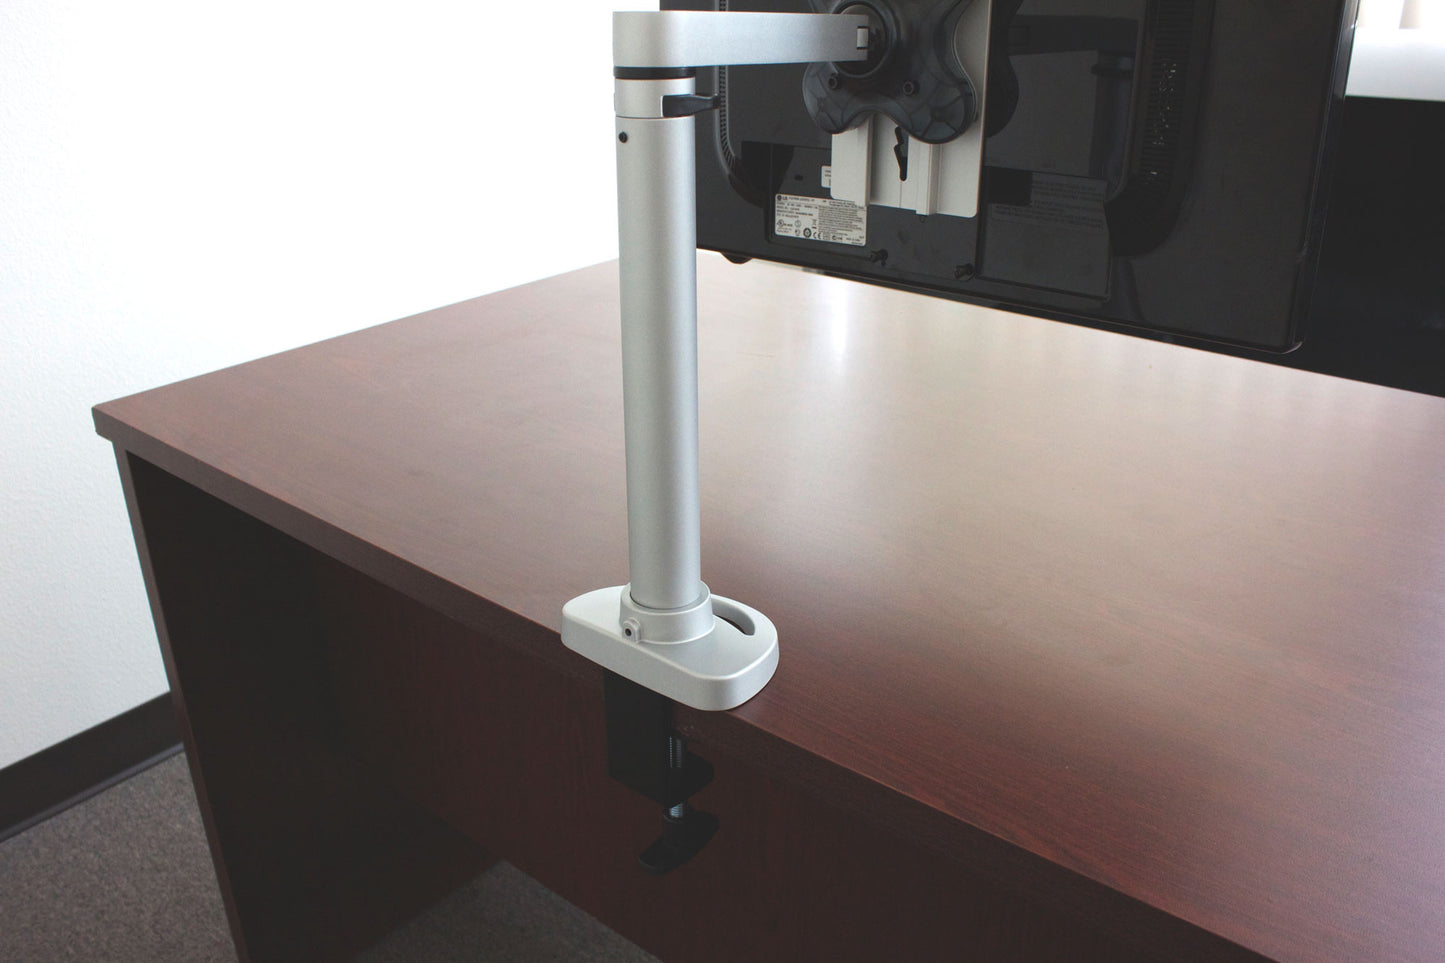 EasyFly Single Monitor Arm with monitor attached